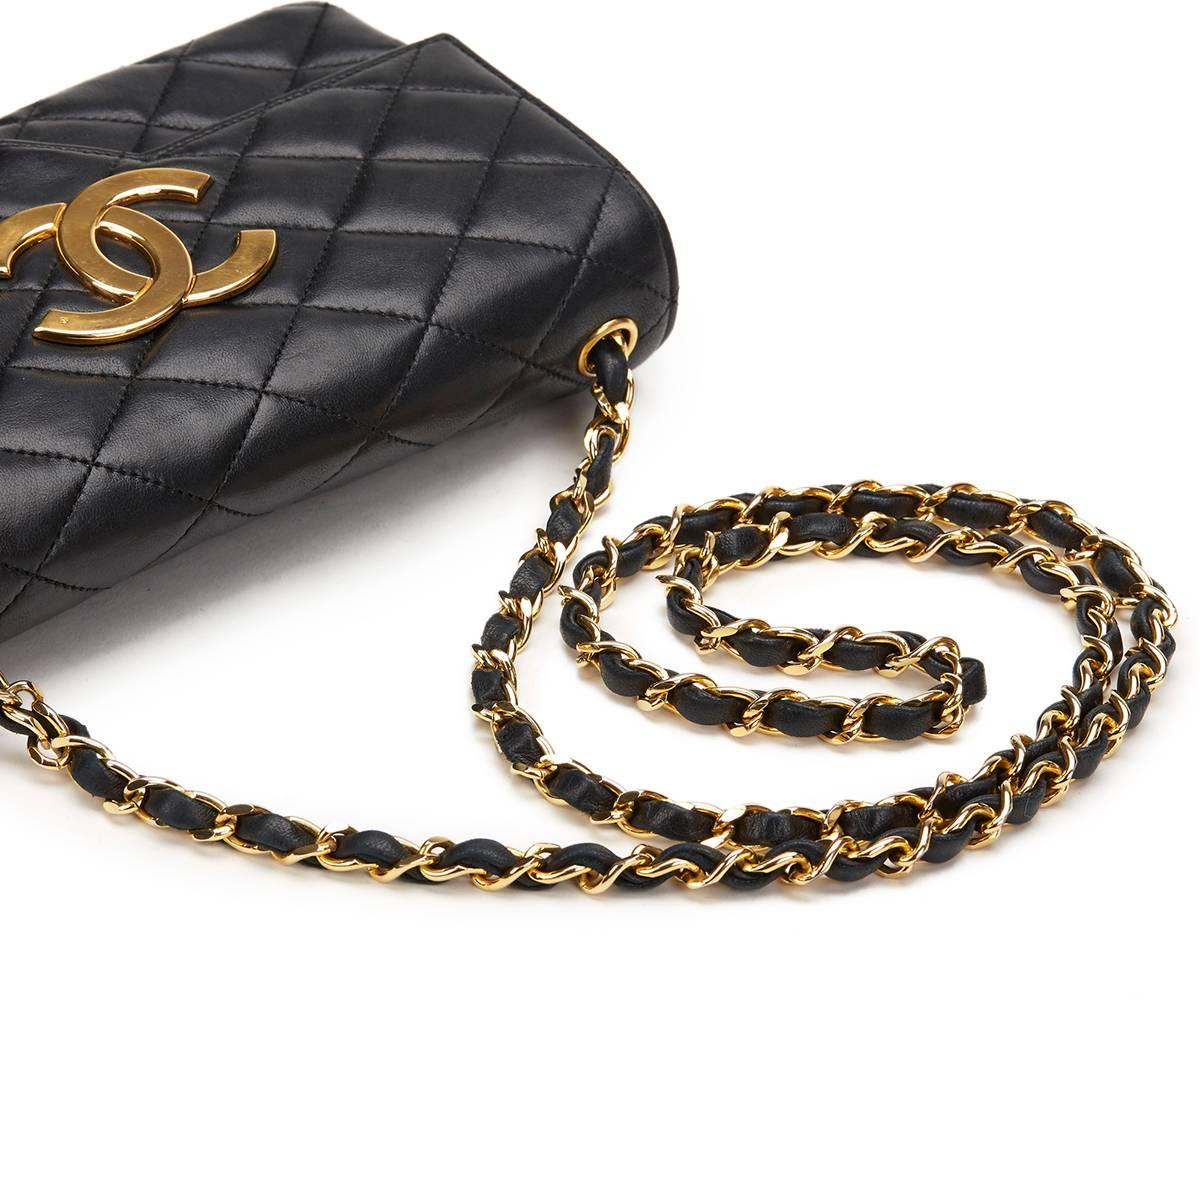 1980s Chanel Black Quilted Lambskin Vintage Single Flap Bag 2